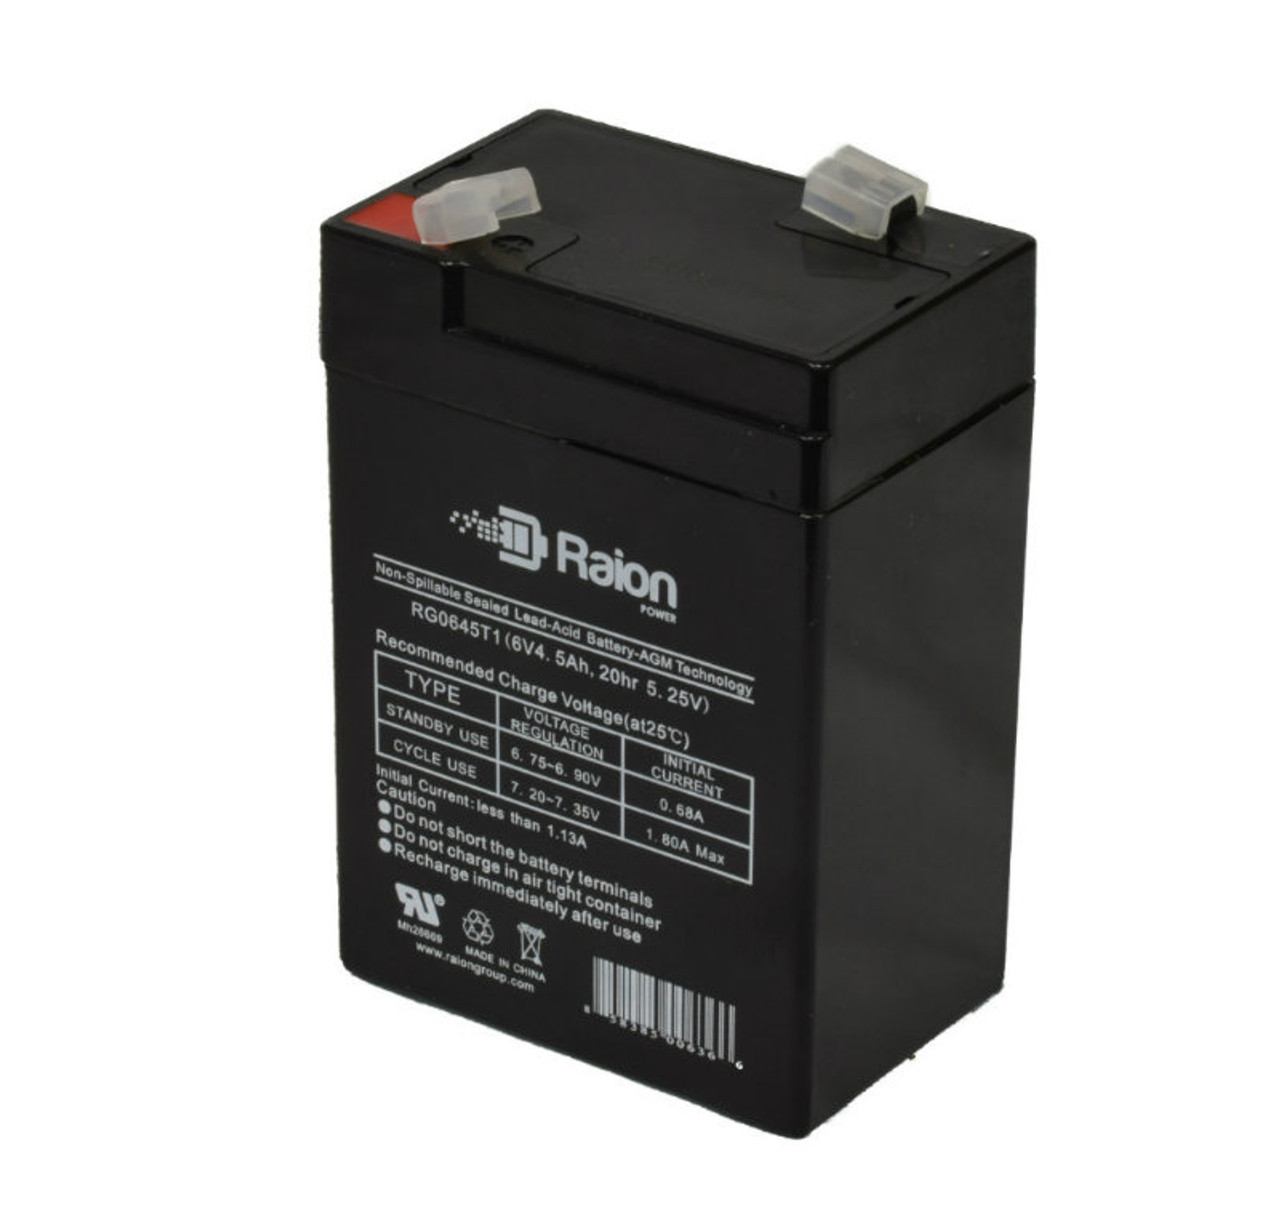 Raion Power RG0645T1 6V 4.5Ah Replacement Battery Cartridge for Peg Perego IGED1079 6V Tool Express